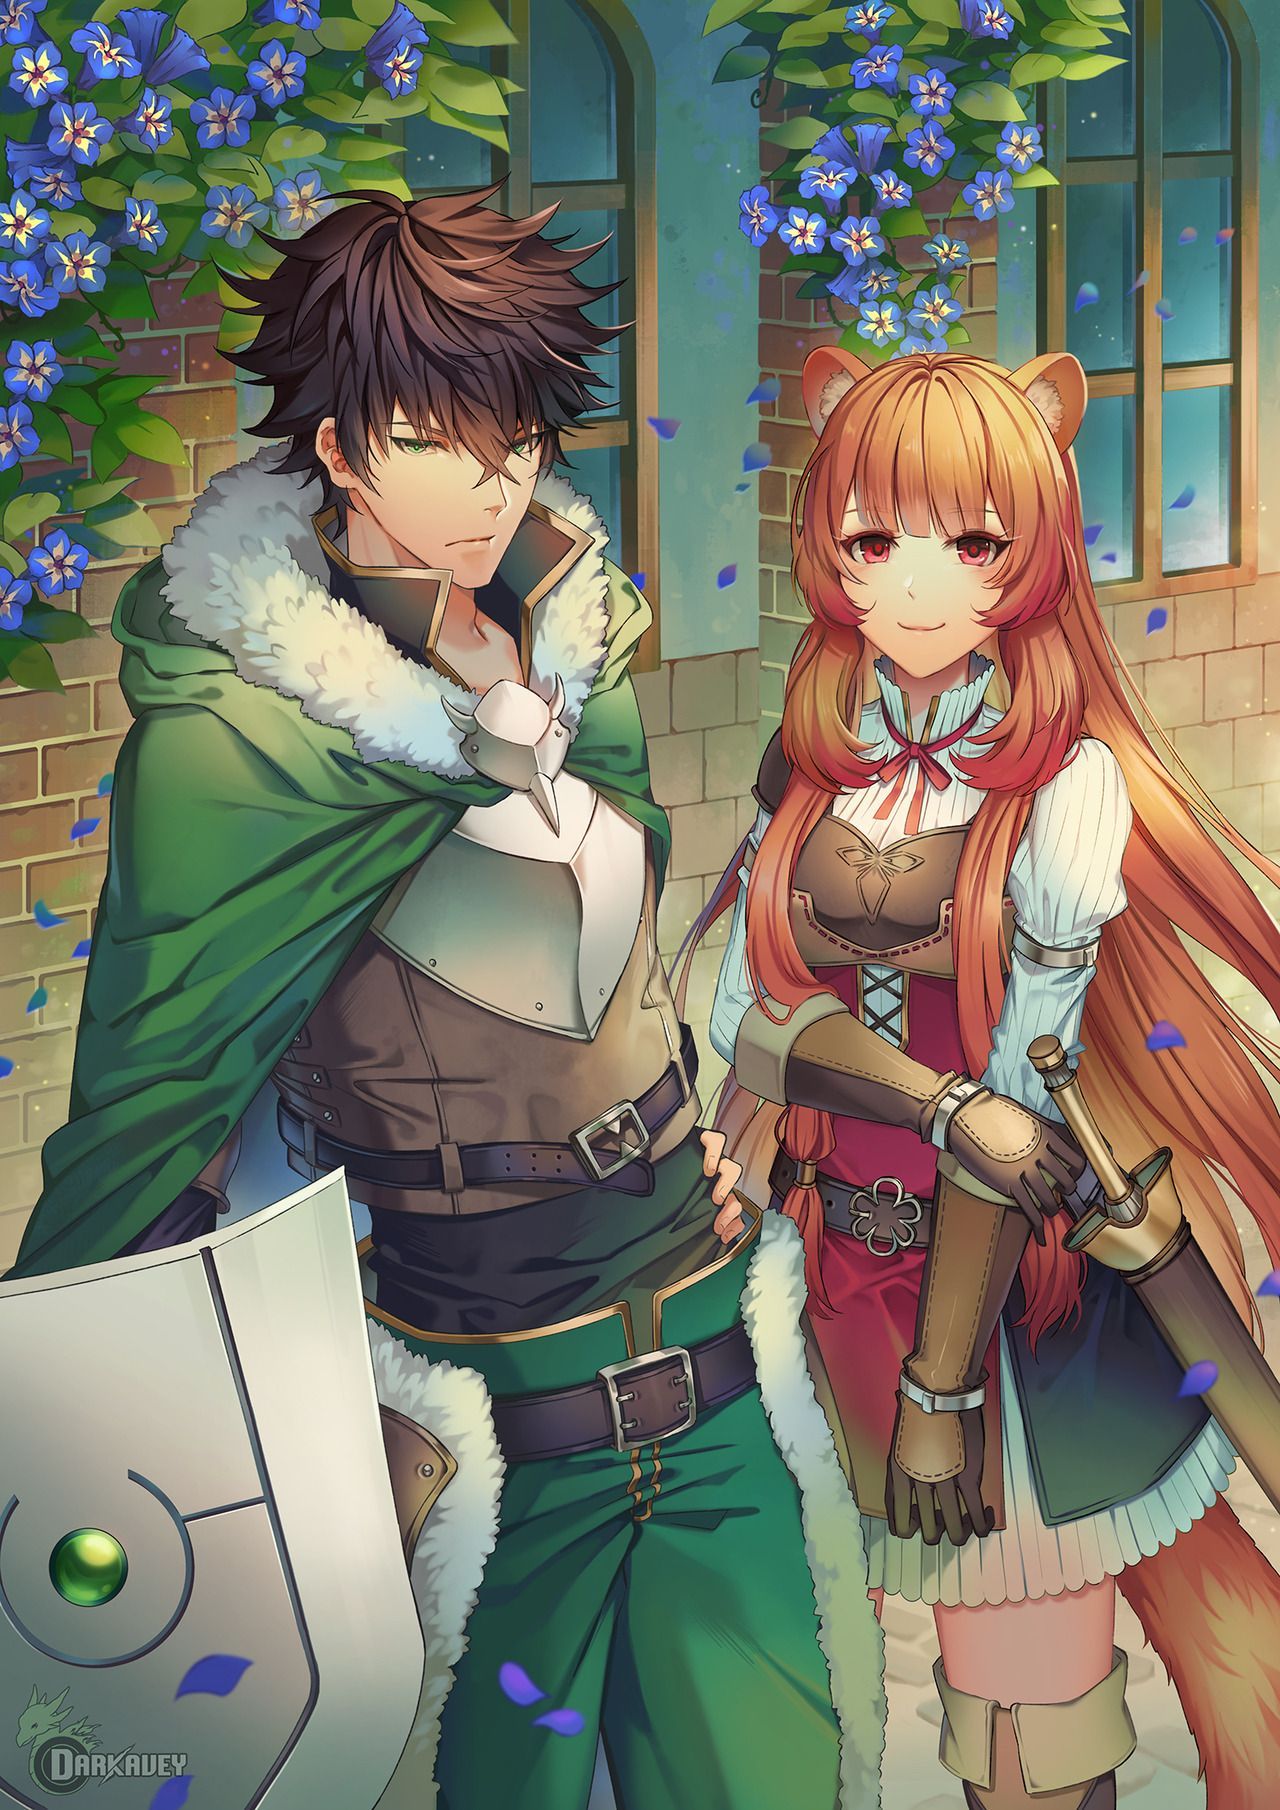 Animepopheart: Darkavey. Naofumi Raphtalia The Rising Of The Shield Hero Republished W Permission Visit My Fb. Anime, Anime Characters, Anime Shows